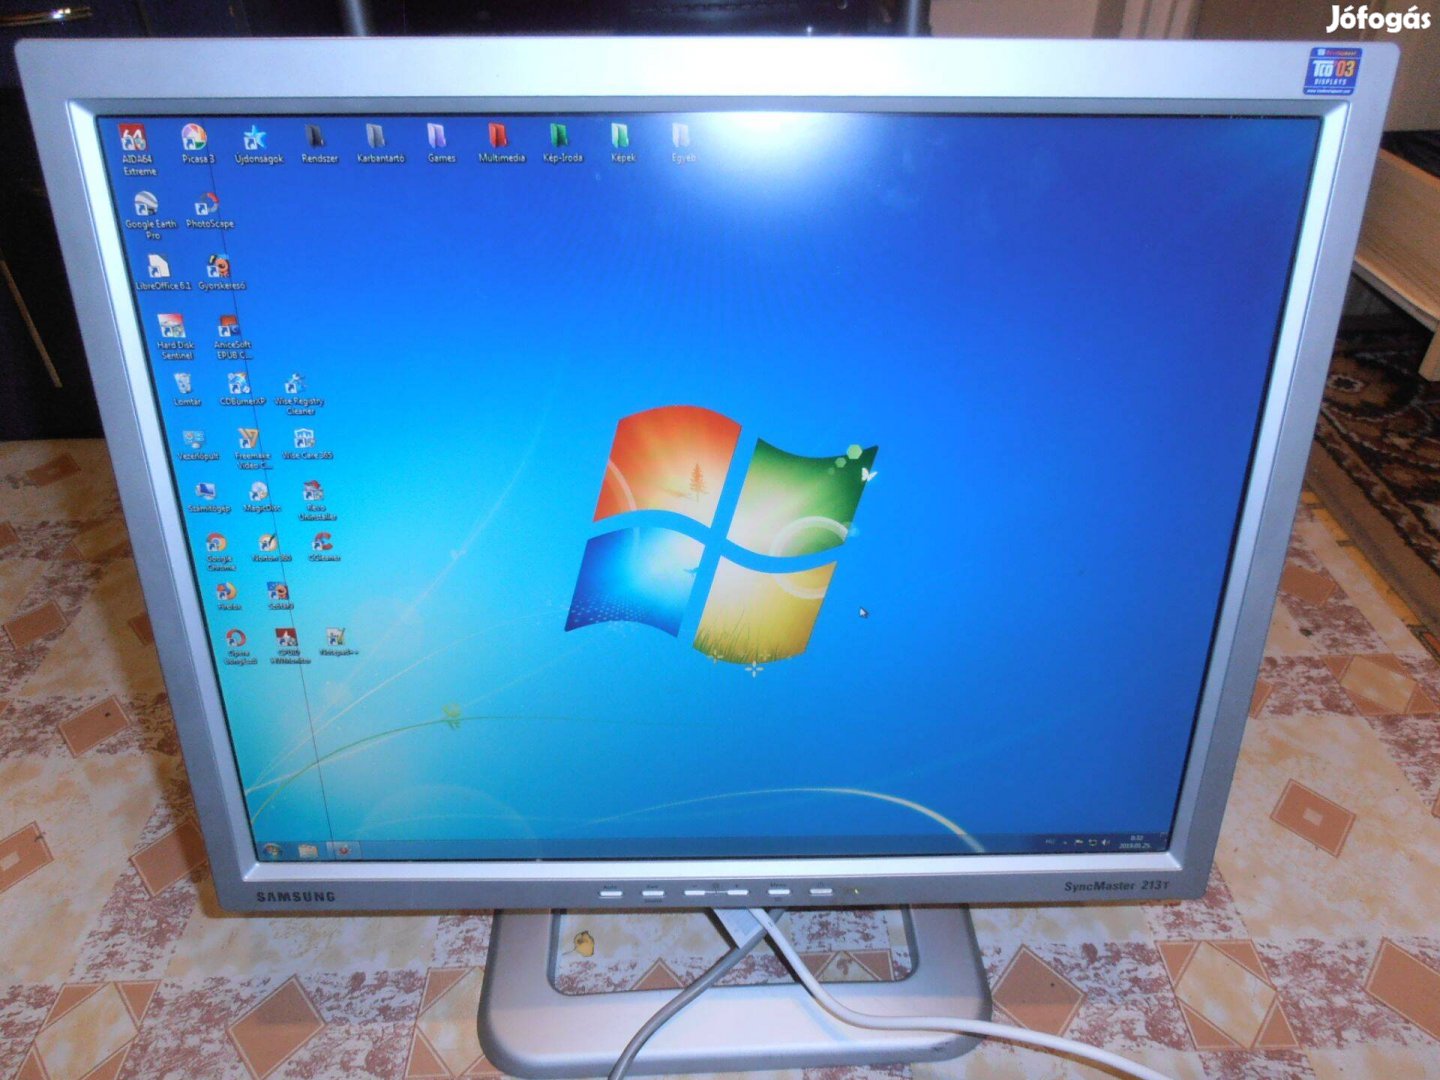 Syncmaster 213T Monitor